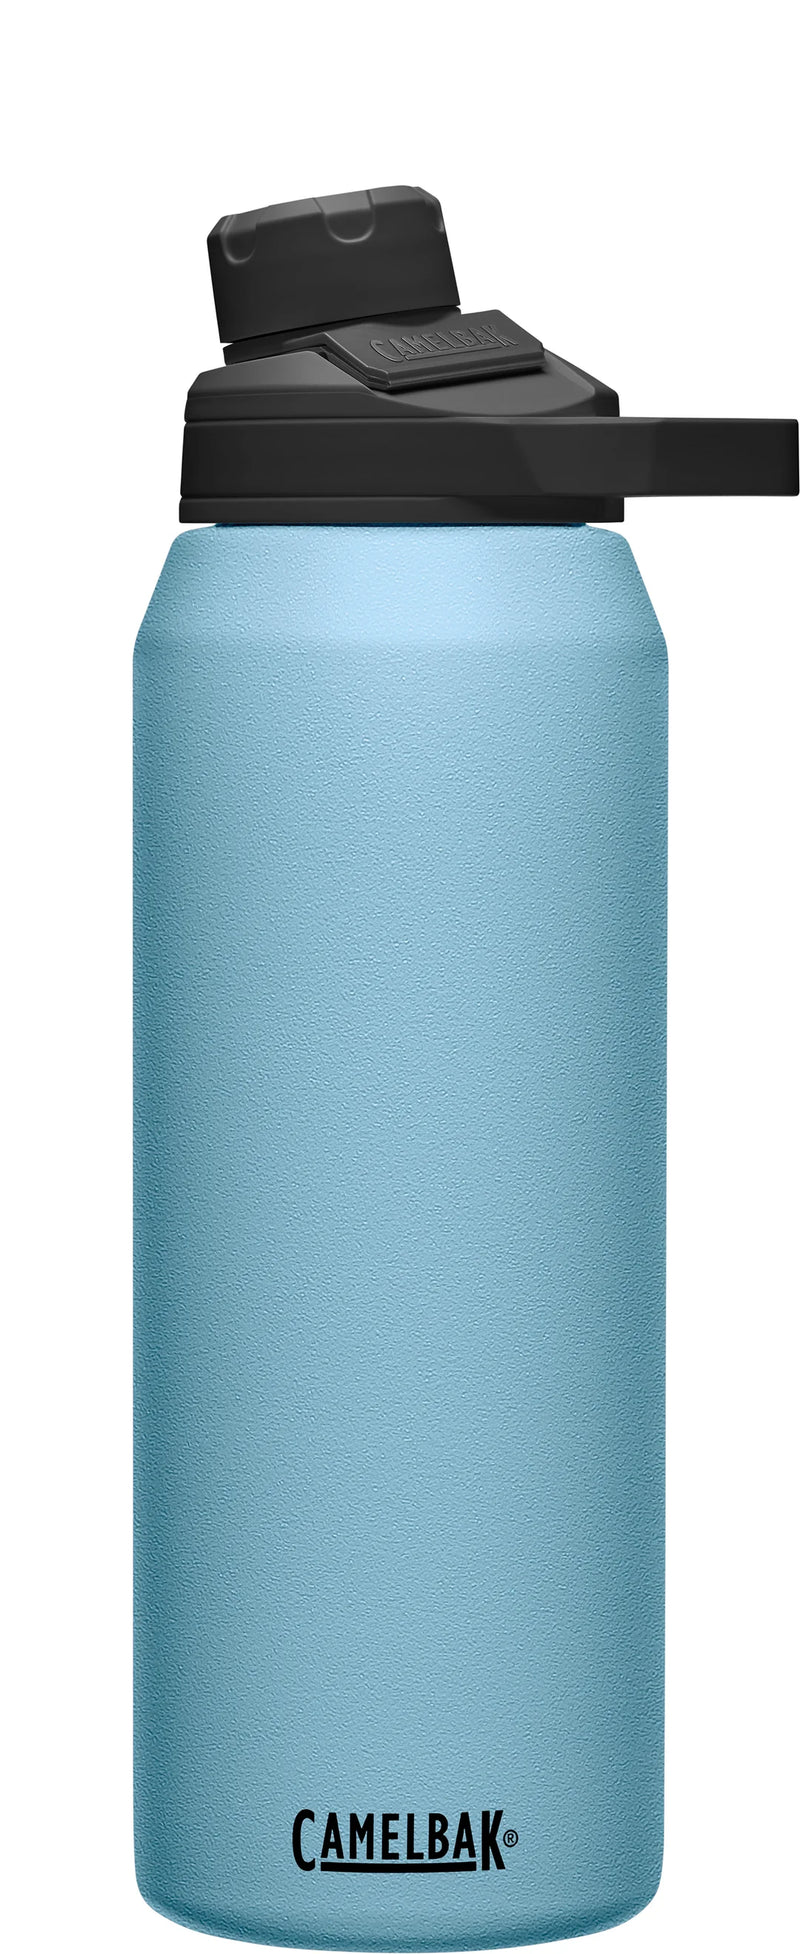 Camelbak Chute Mag Stainless Steel Vacuum Insulated 1L Flask